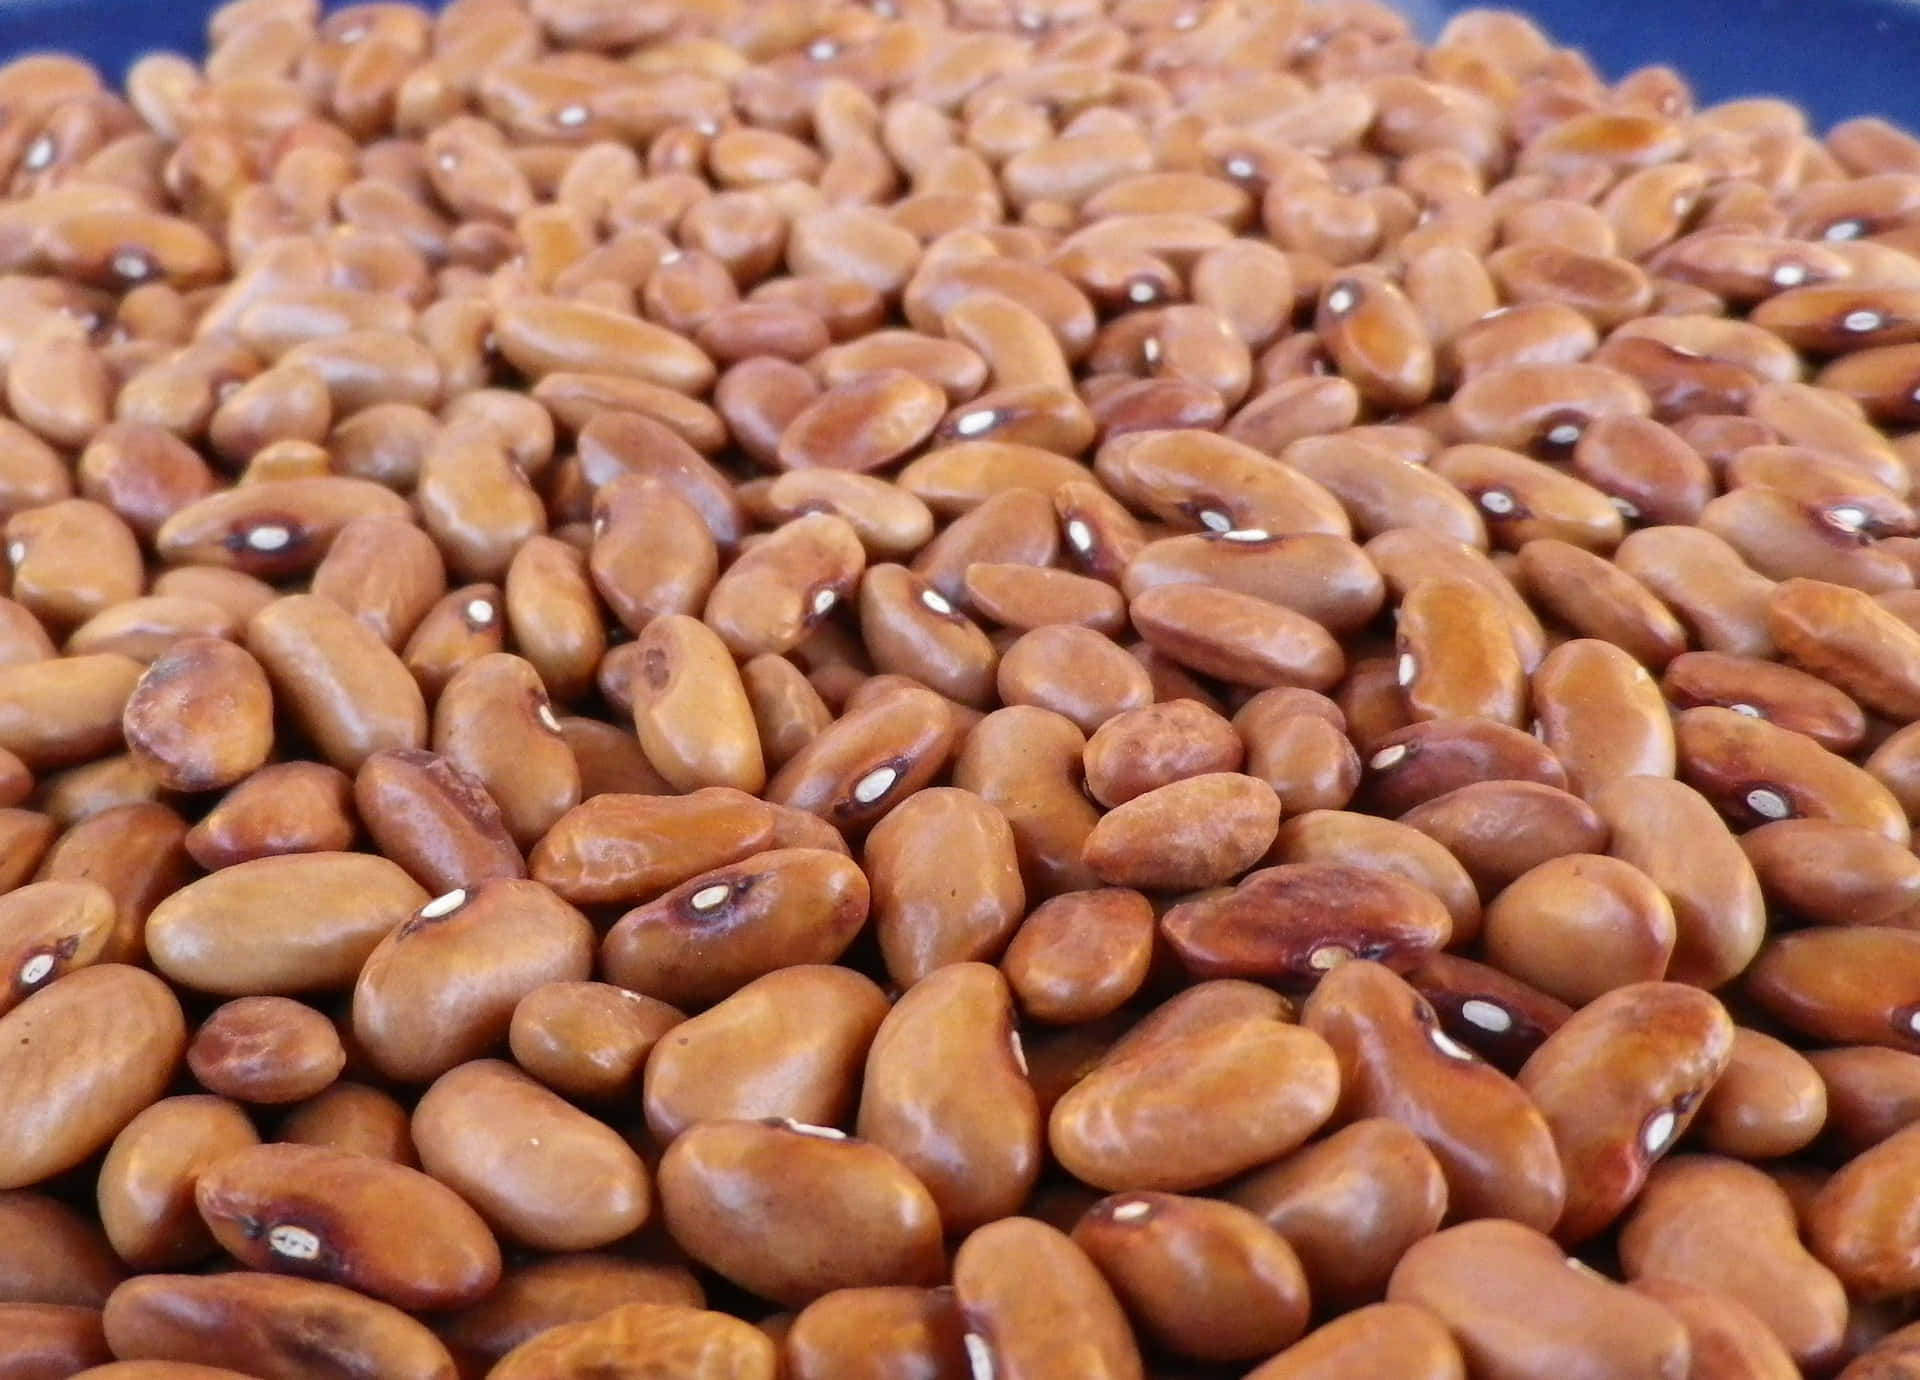 An up-close shot of freshly cooked beans ready for adding to your favorite dish.